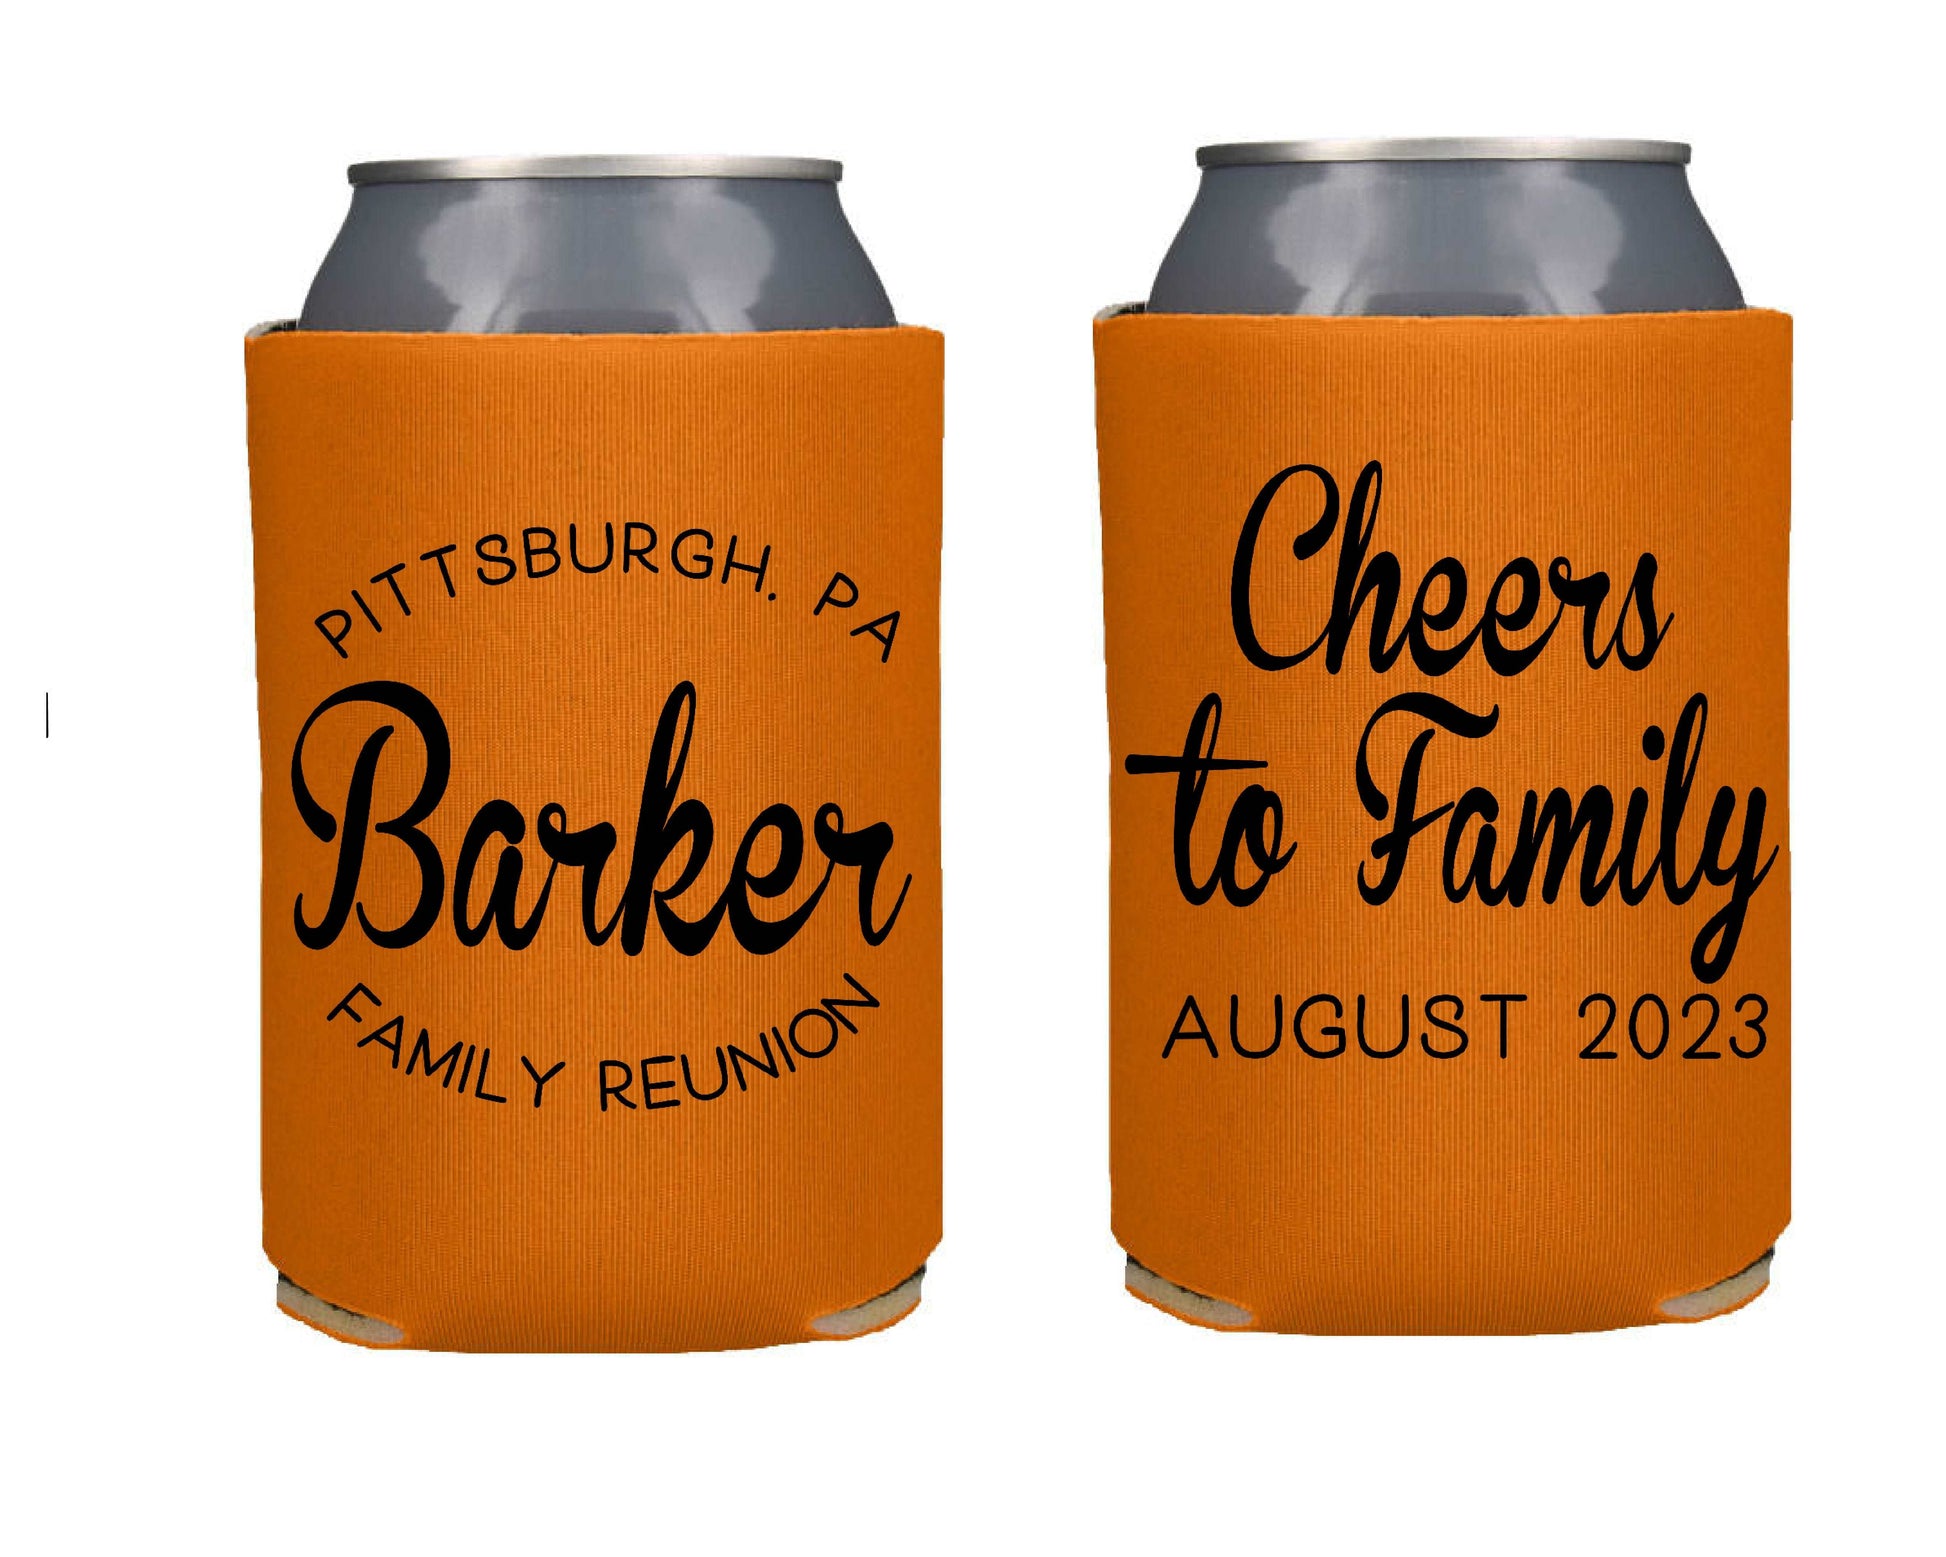 Cheers to Family Reunion Screen Printed Can Cooler